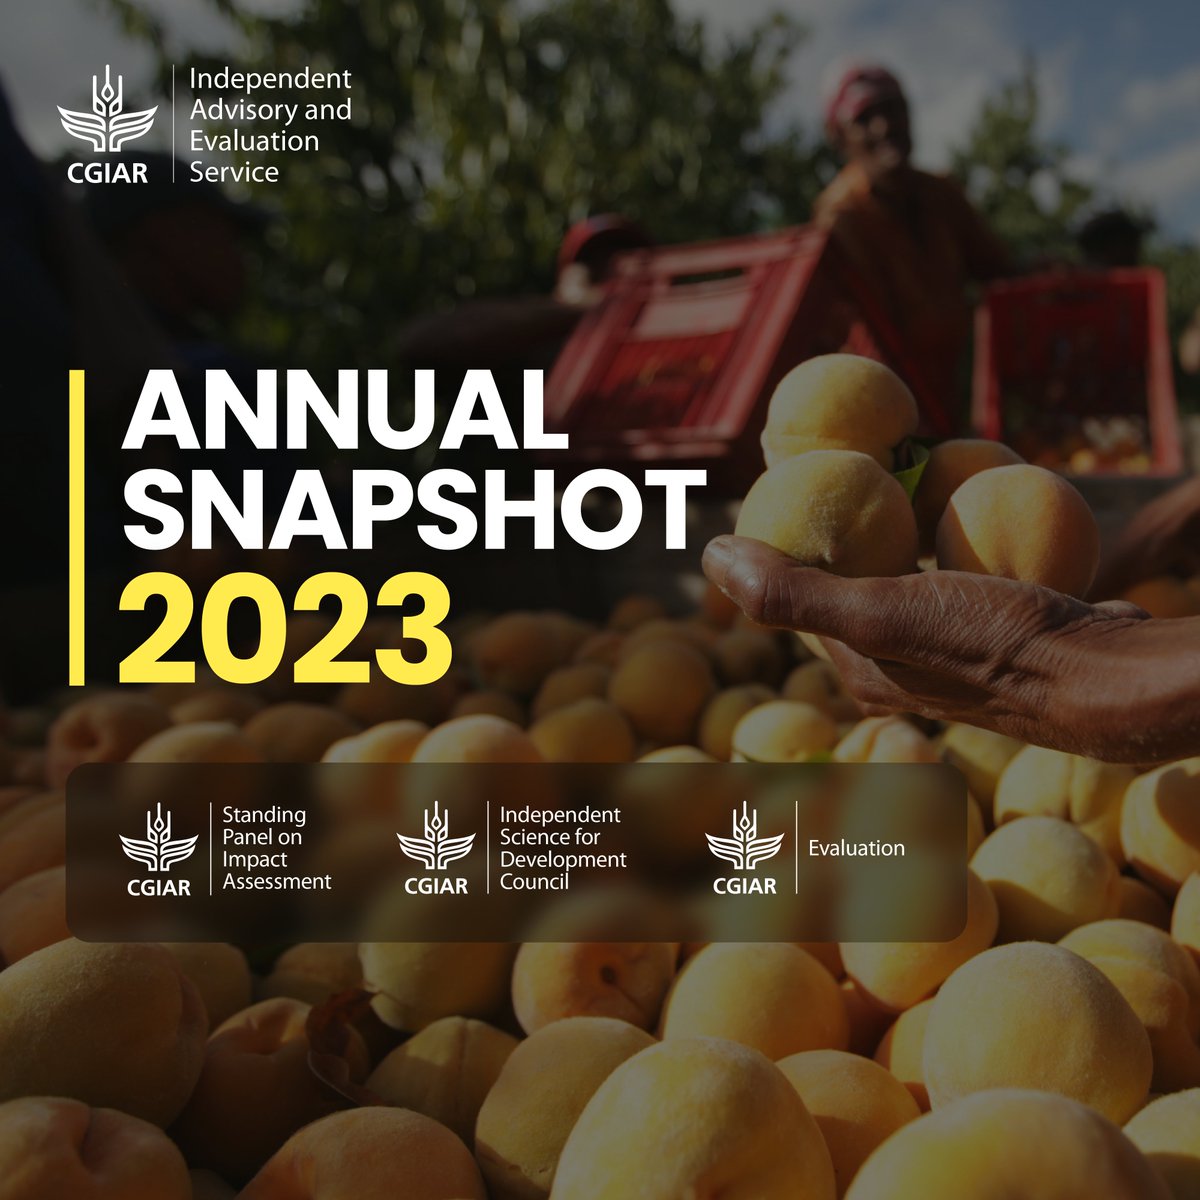 🚀 Out now: @IAES_CGIAR 2023 Annual Snapshot From advising to evidence-based evaluations of the @CGIAR, the 2023 efforts of @isdc_cgiar, @cgiarspia & the Evaluation Function, backed by IAES operational support, showcase a year of exceptional productivity: bit.ly/4bK83Km